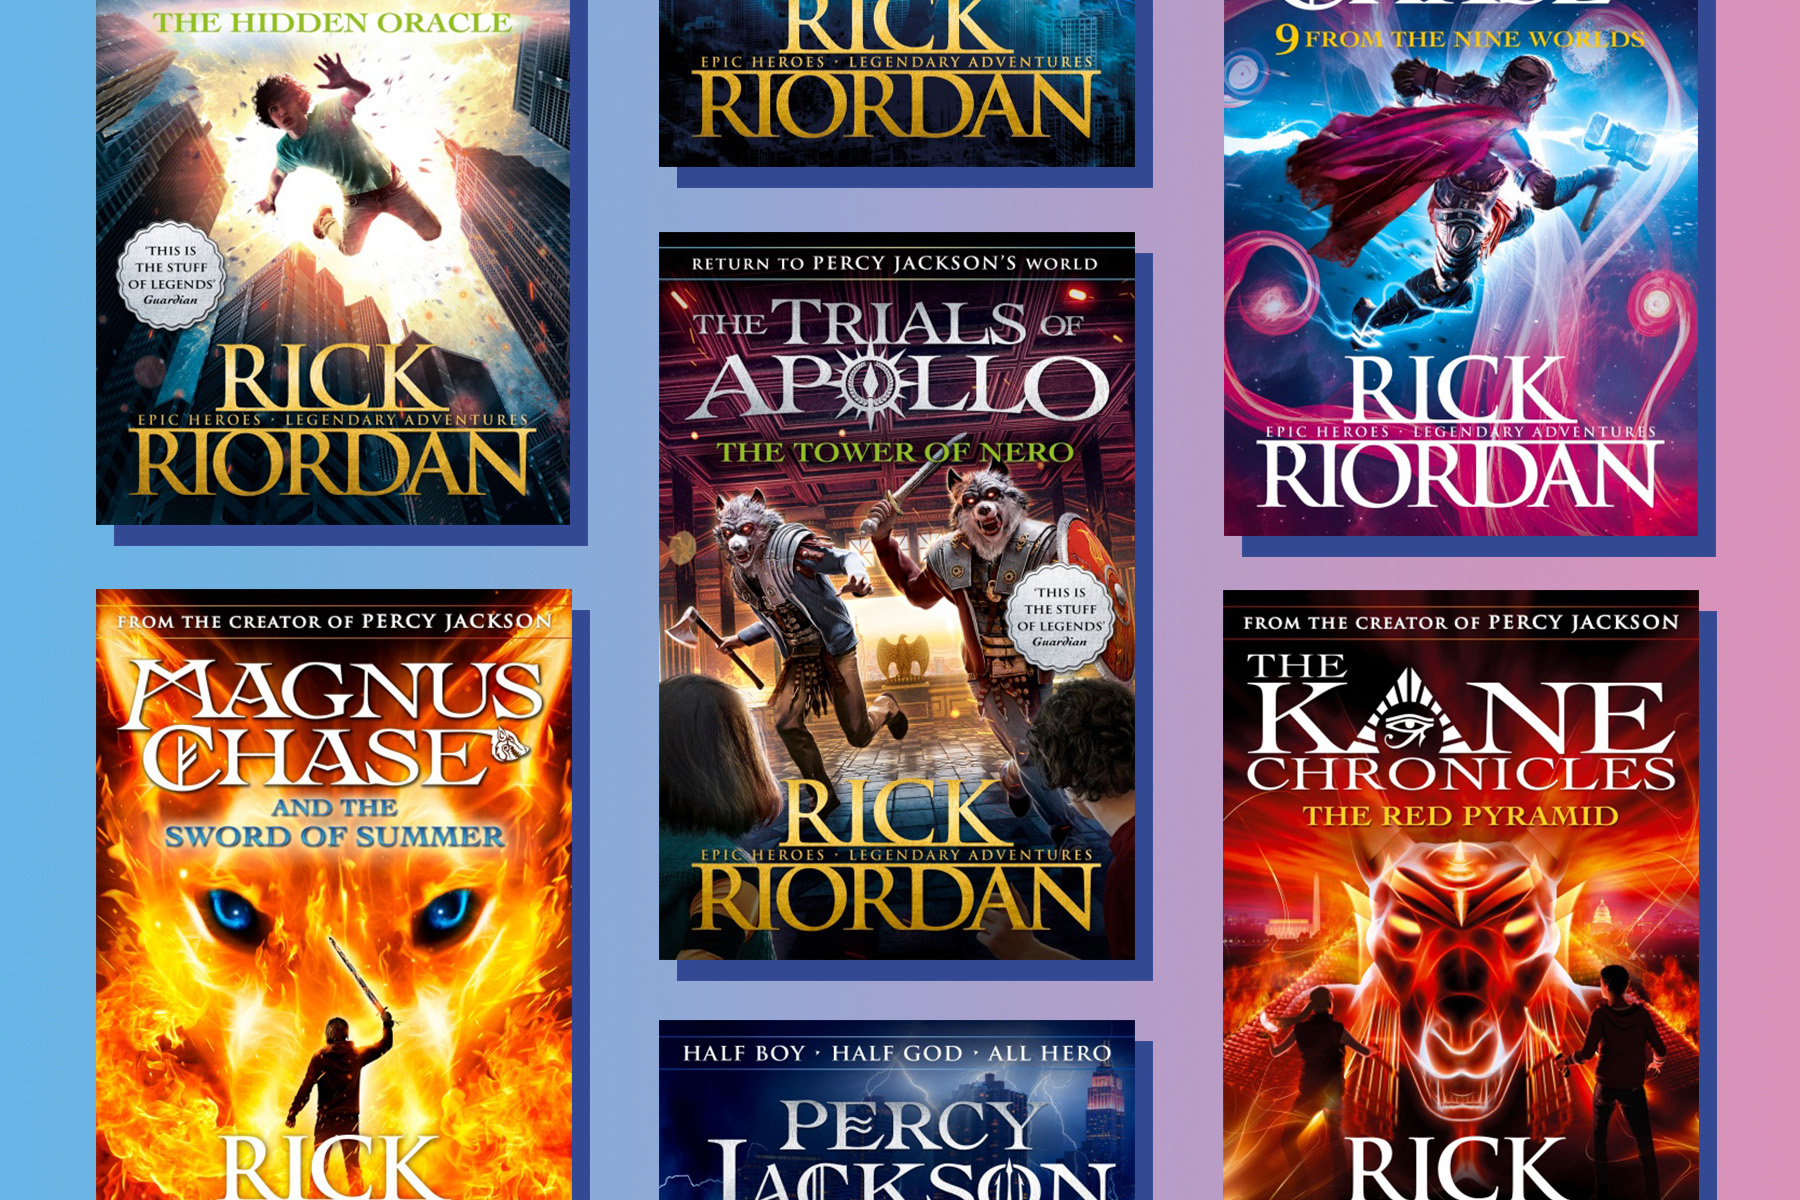 A selection of Rick Riordan's books on a faded pink and blue background